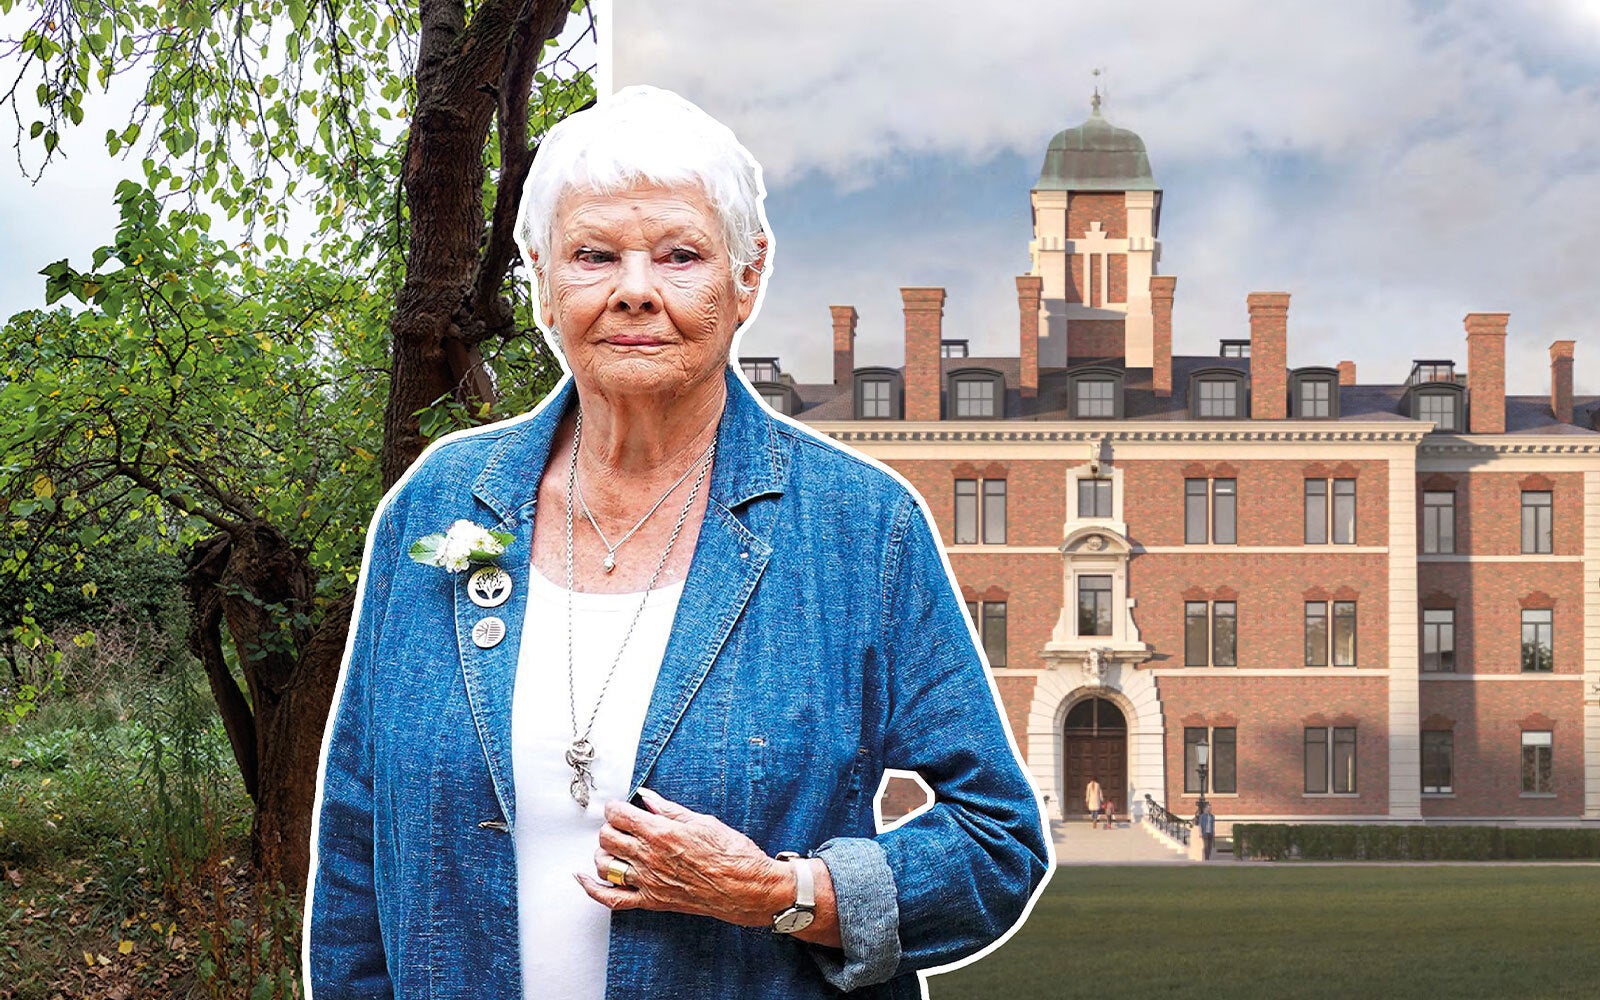 Judi Dench's beloved 400-year-old tree preserved in new housing plans